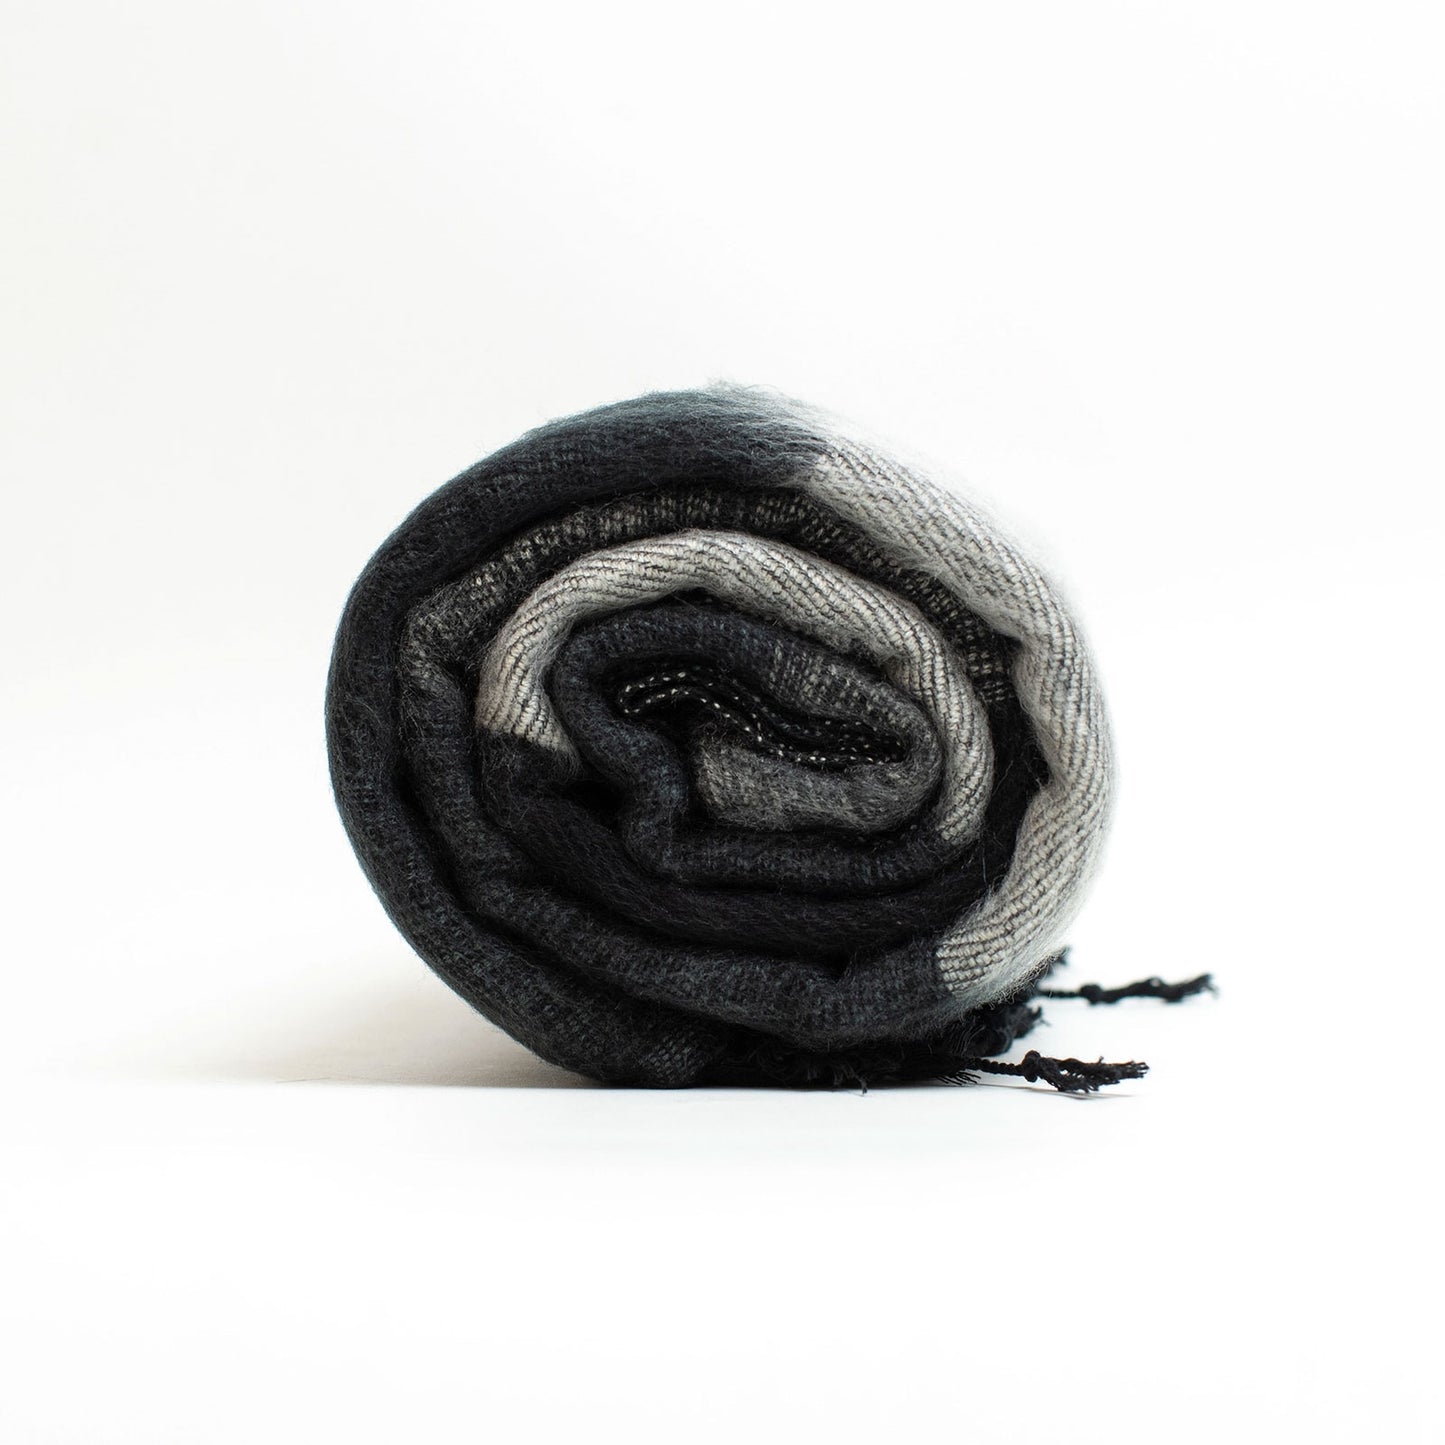 Extra Soft Wool Throw in Black and White